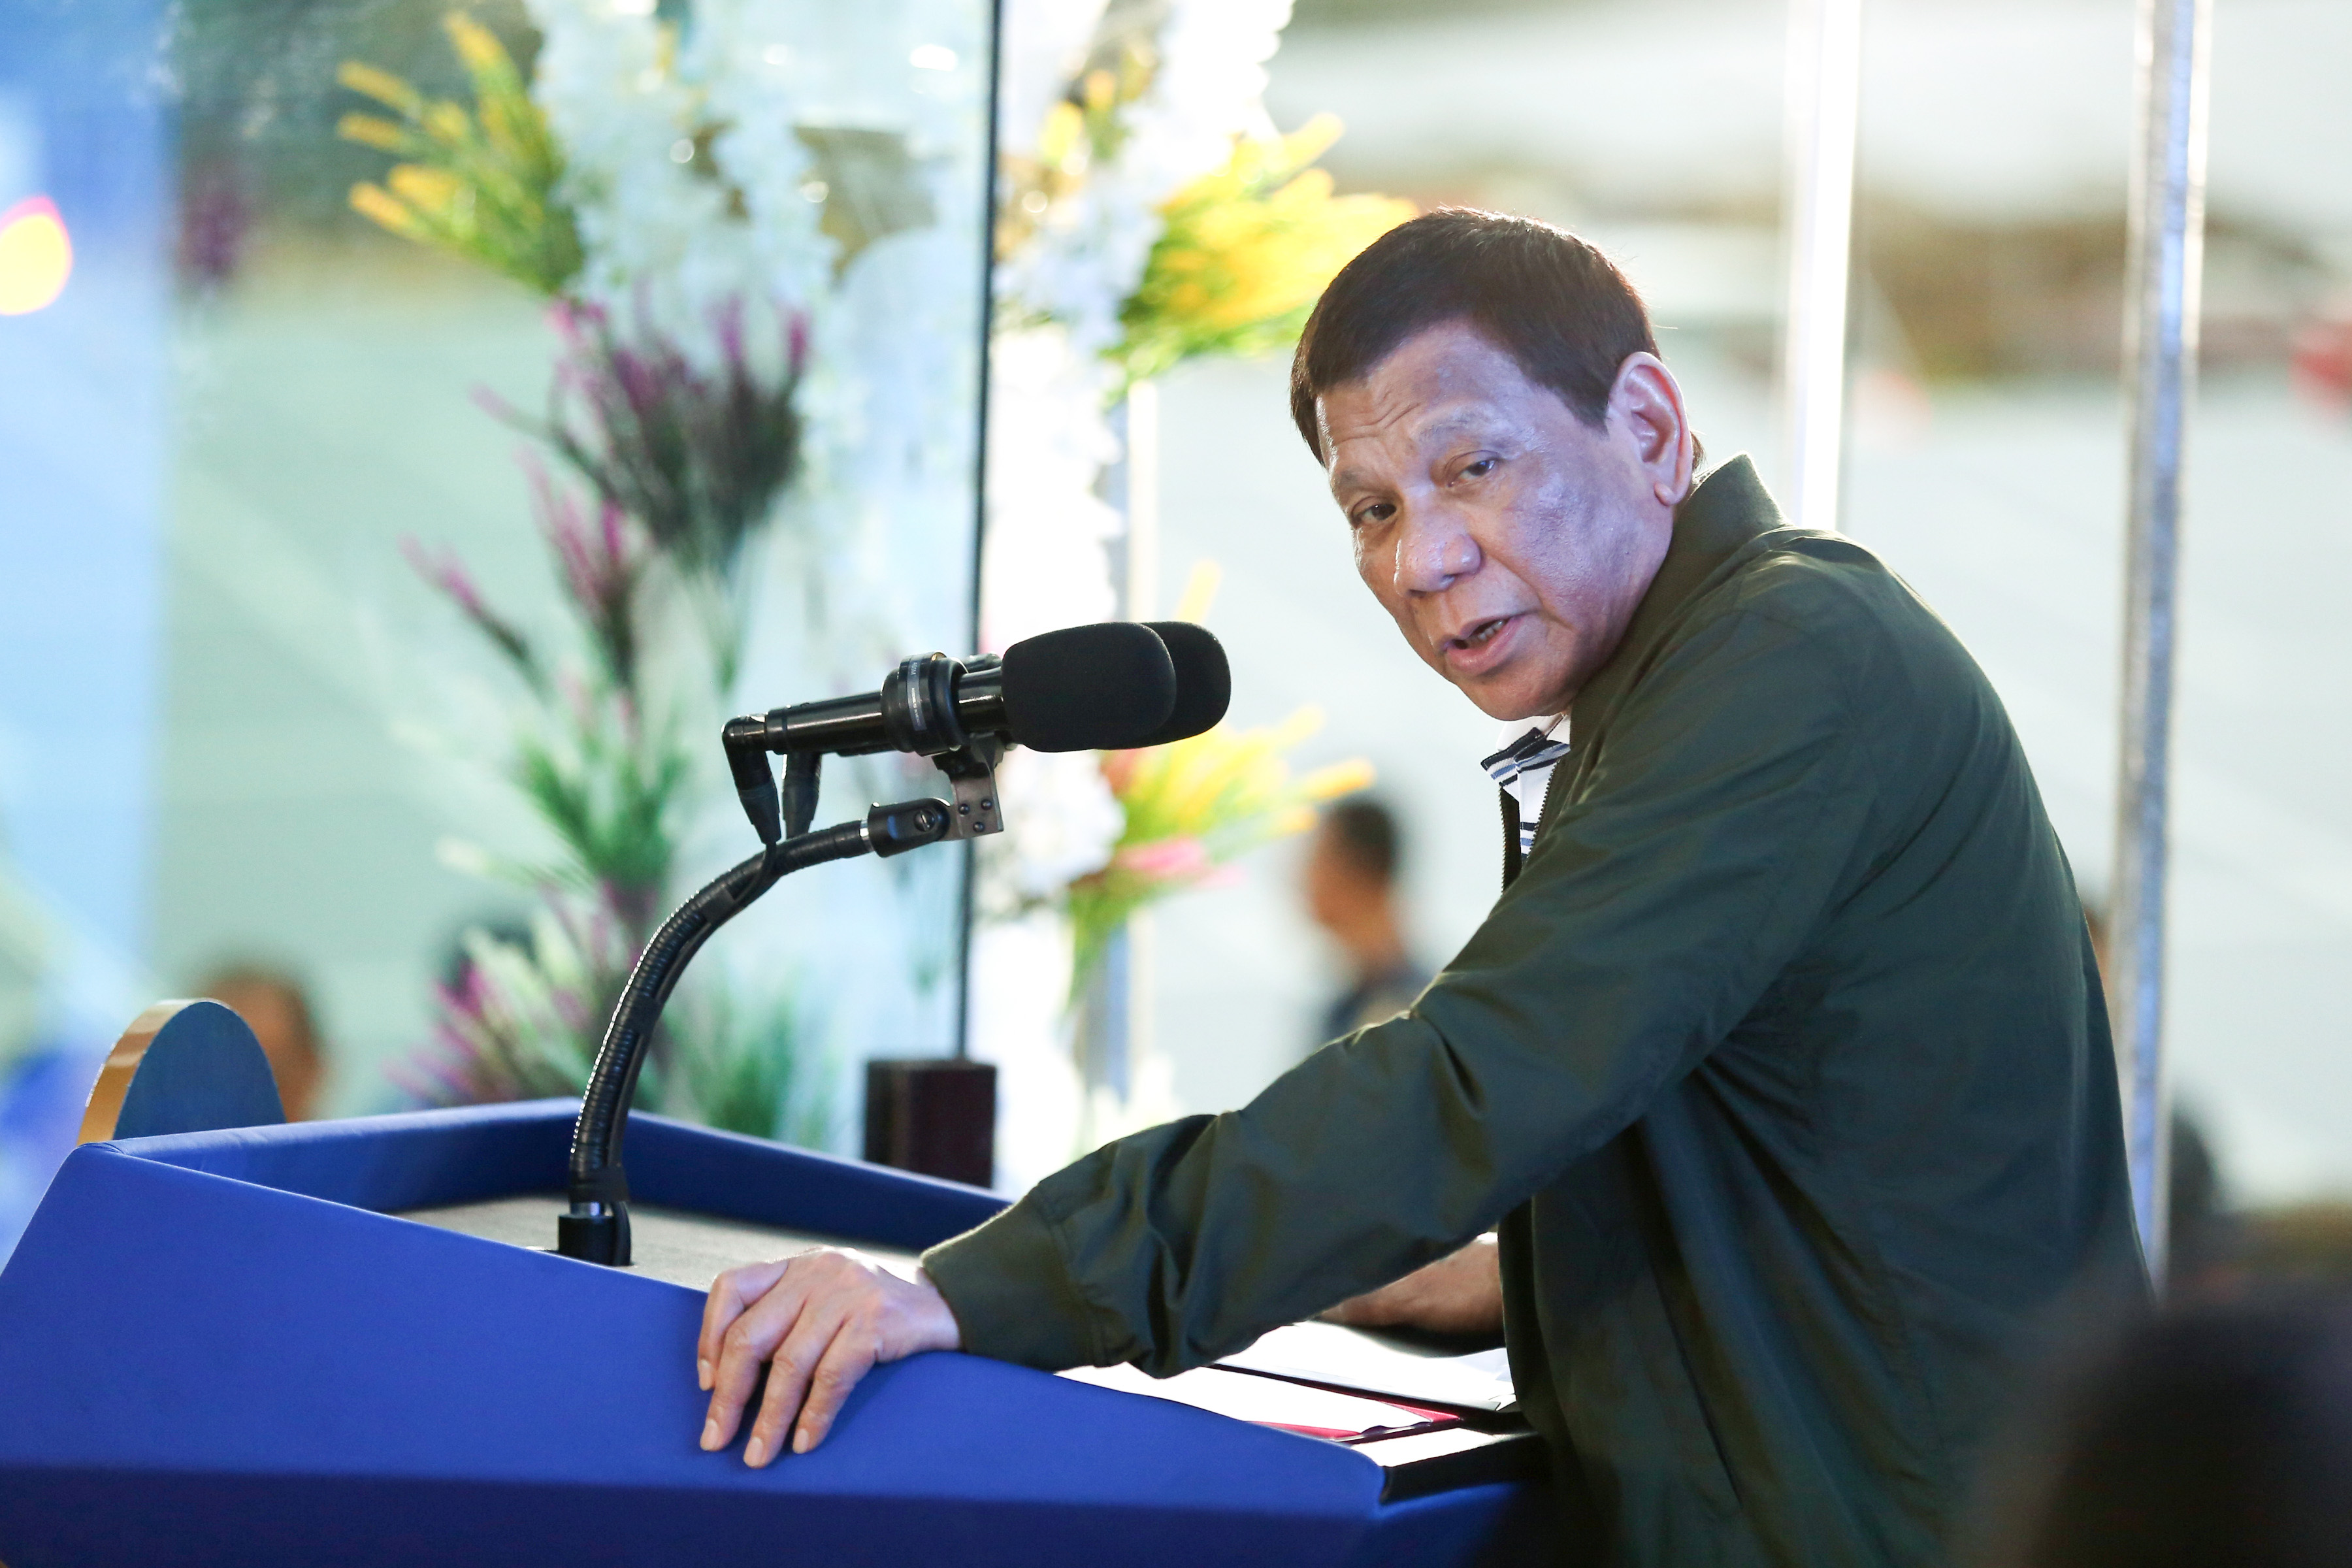 Duterte’s approval and trust ratings drop in September poll – Pulse Asia